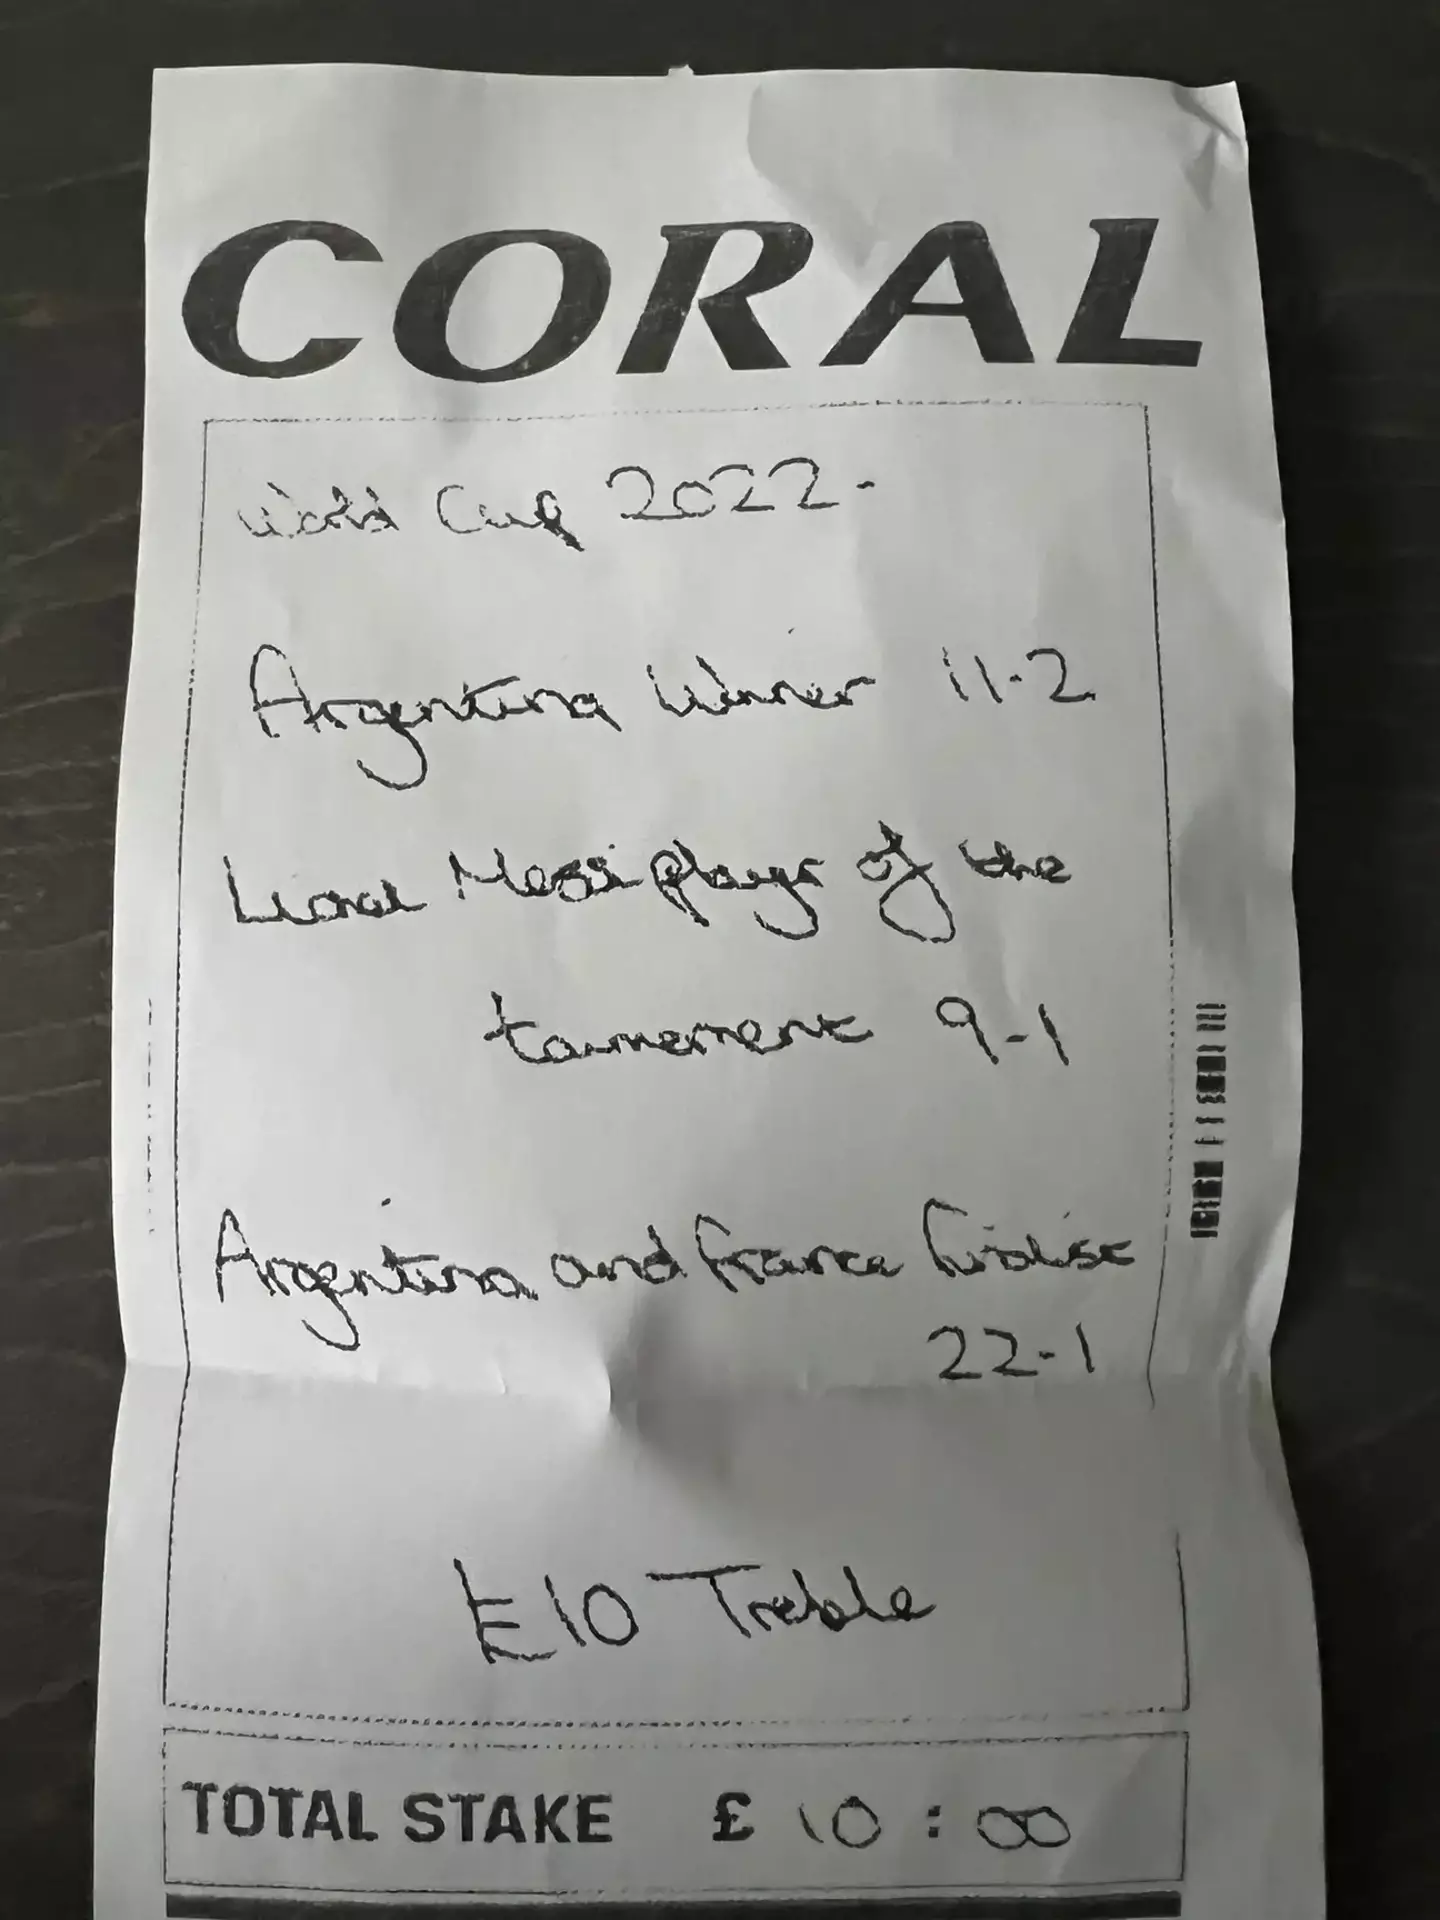 The betting slip Liam expected would take him from £10 to nearly £15,000, only it didn't pay out.